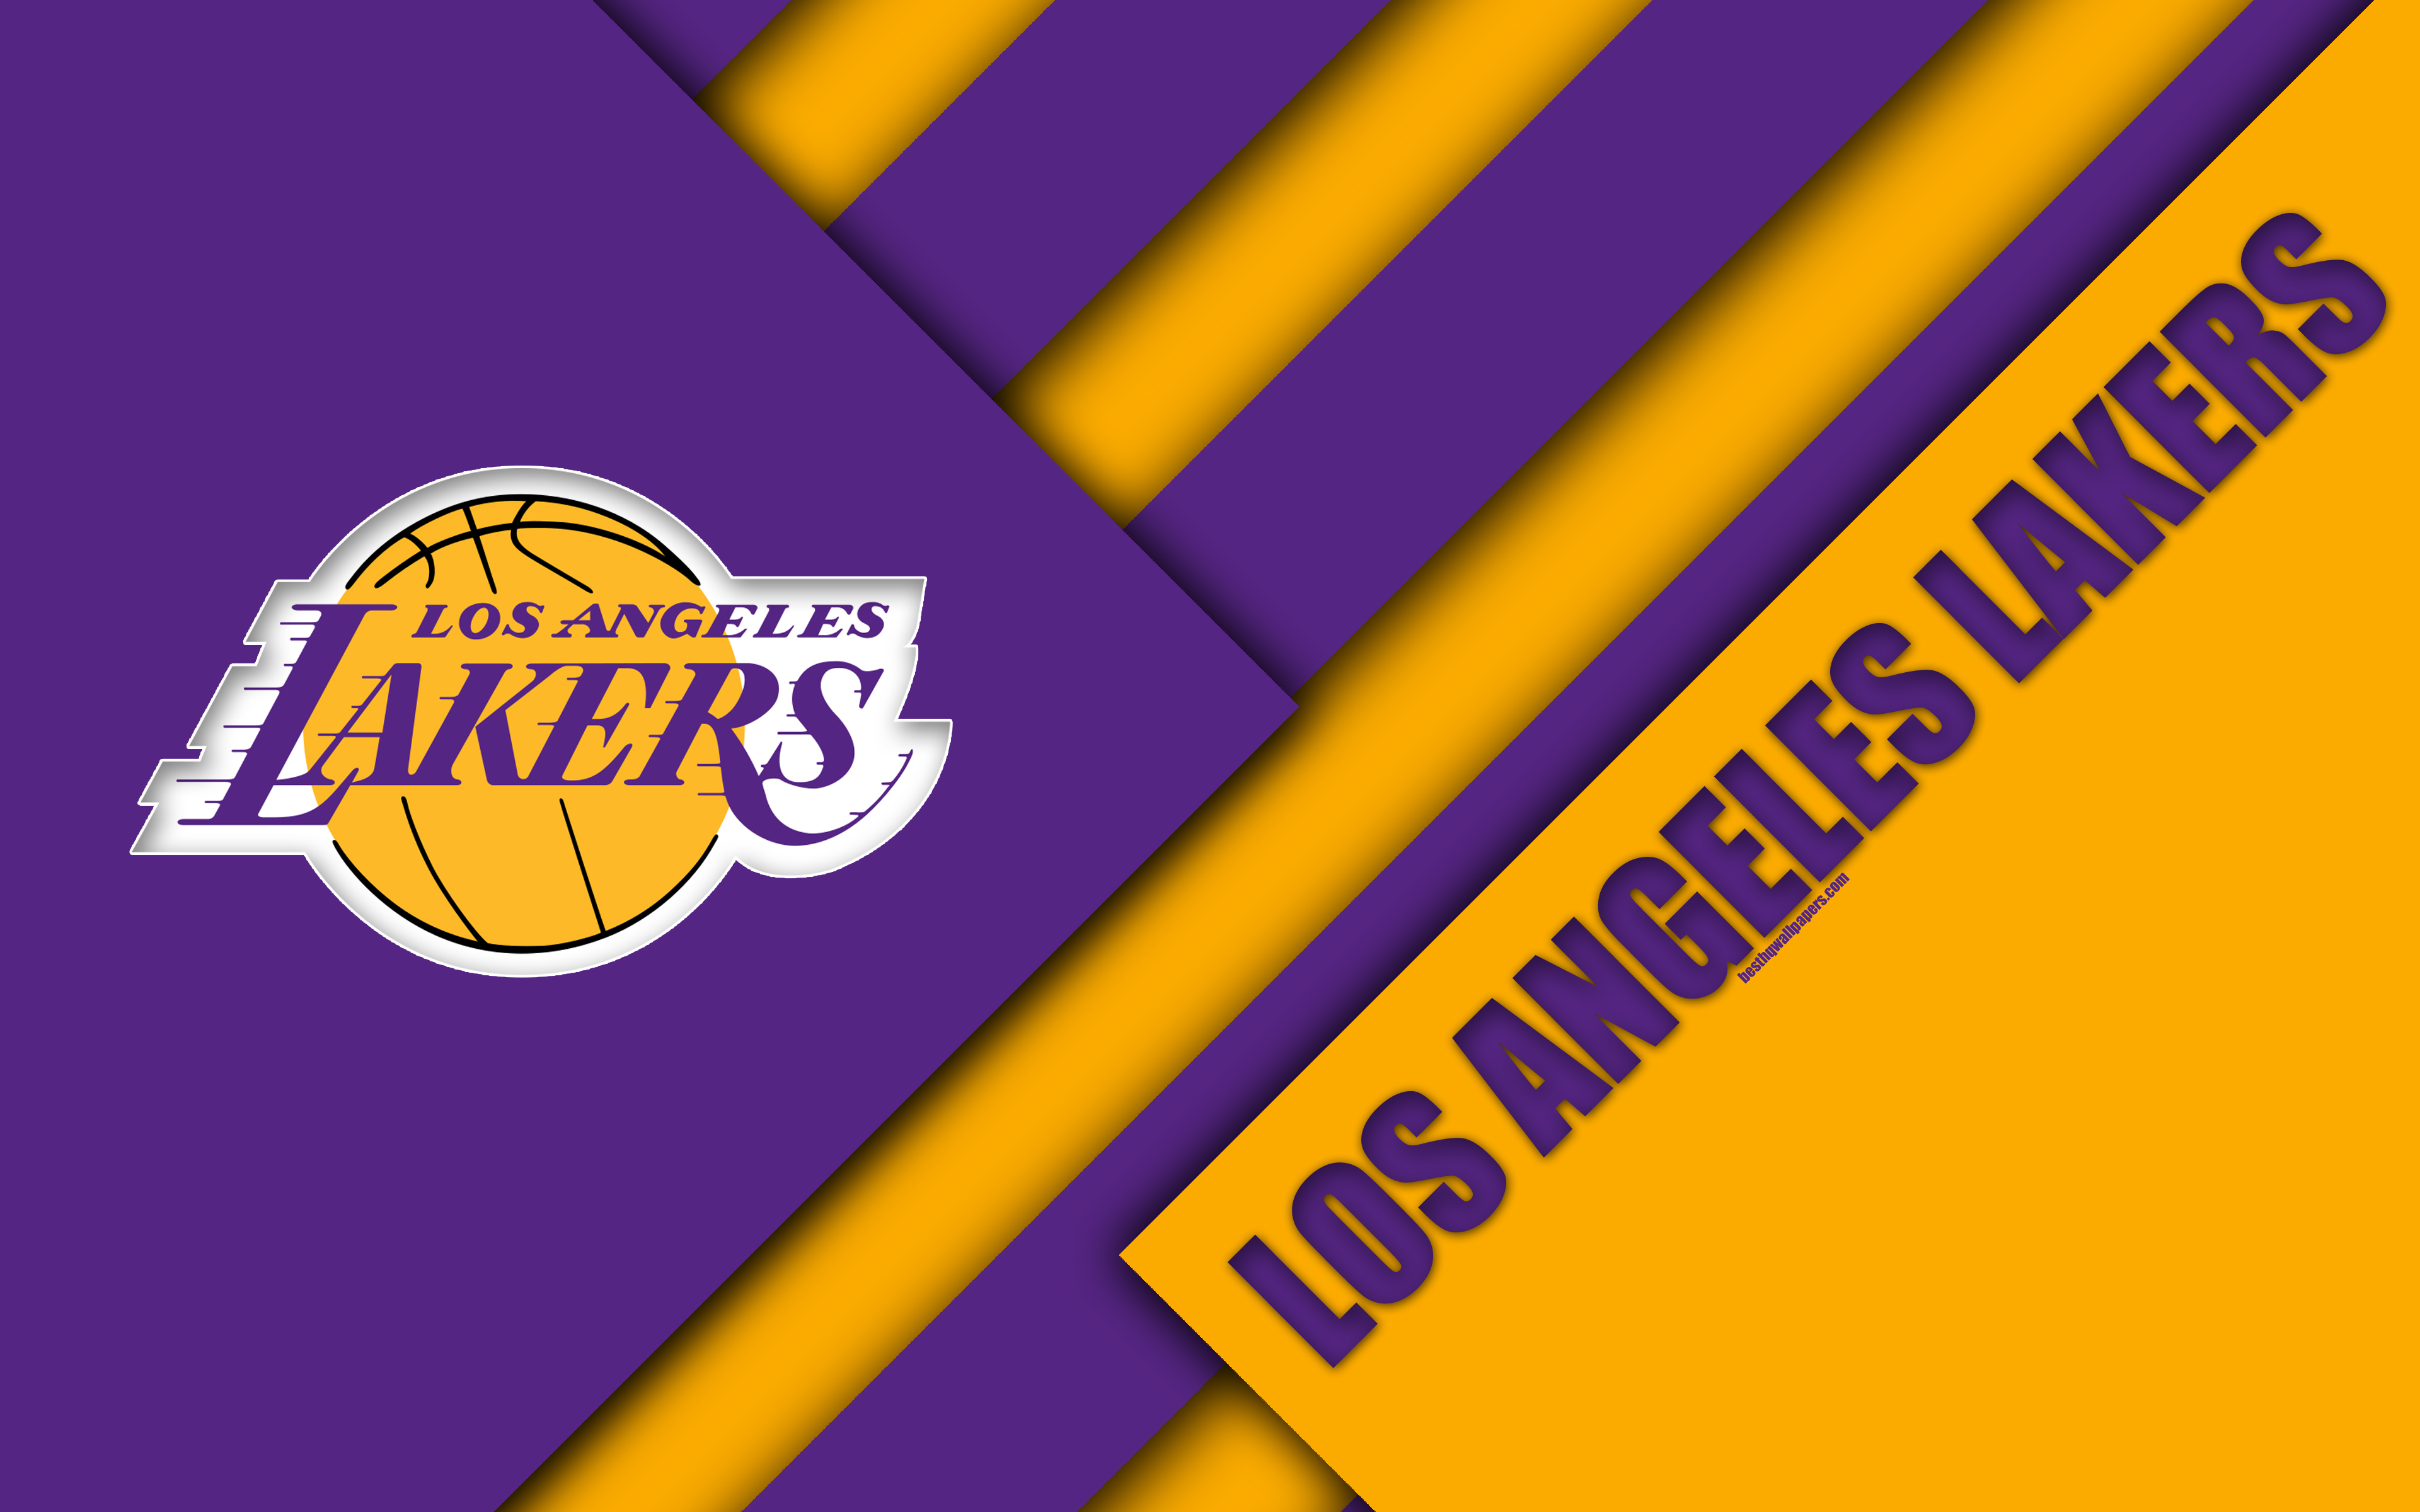 Download wallpaper Los Angeles Lakers, 4k, logo, material design, American basketball club, purple yellow abstraction, NBA, Los Angeles, California, USA, basketball for desktop with resolution 3840x2400. High Quality HD picture wallpaper